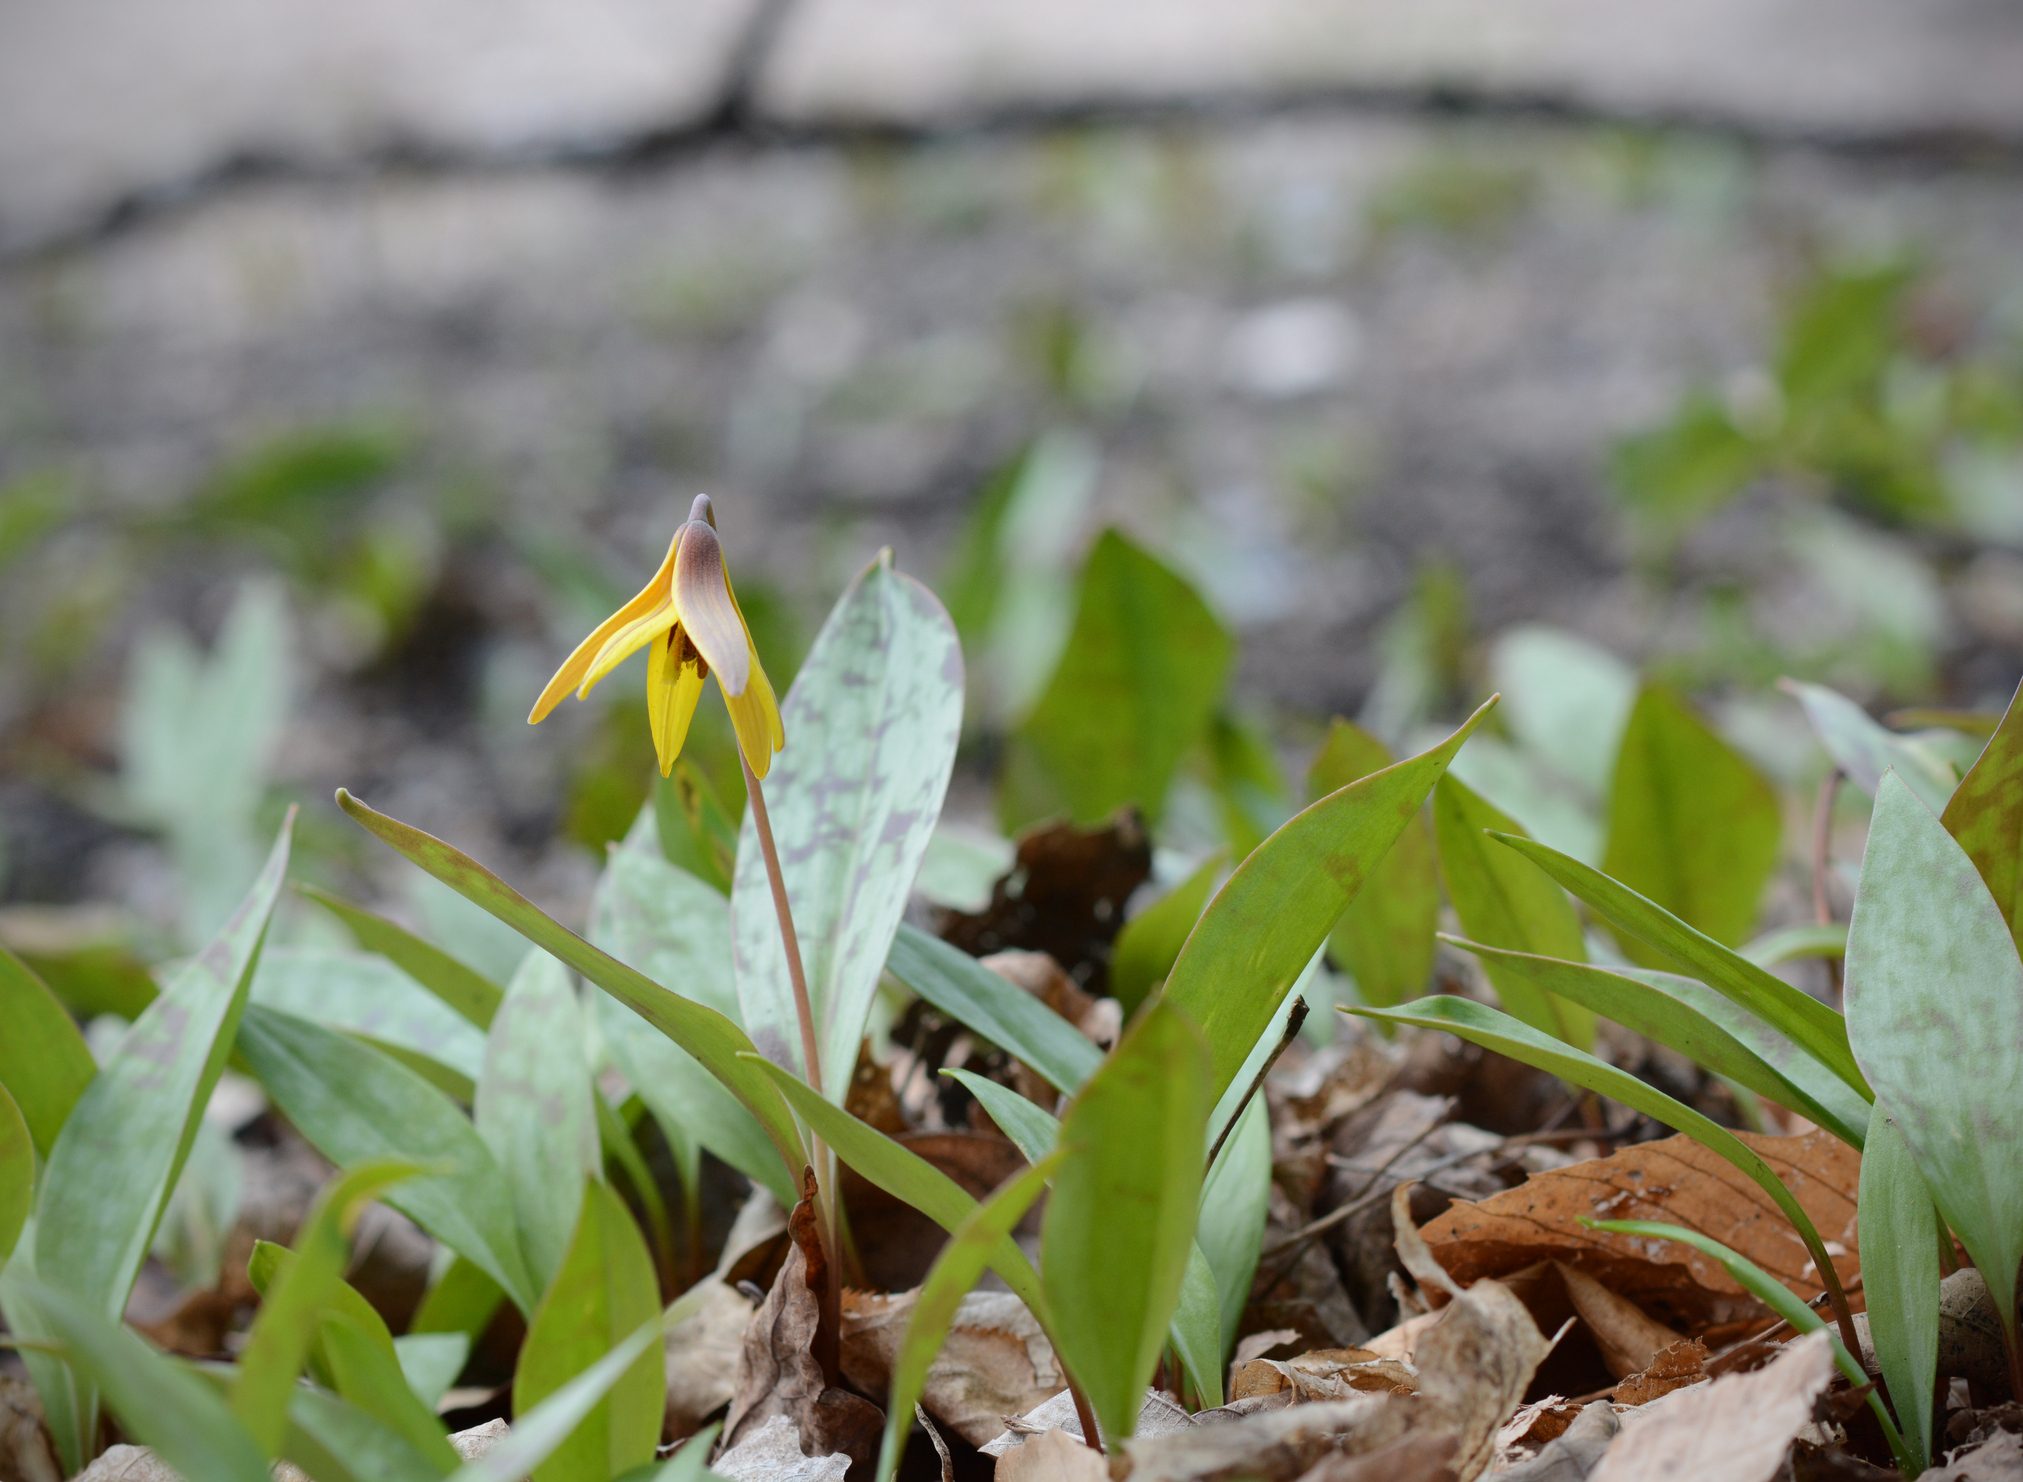 Native Trout Lily Adds Early Spring Color to Shade